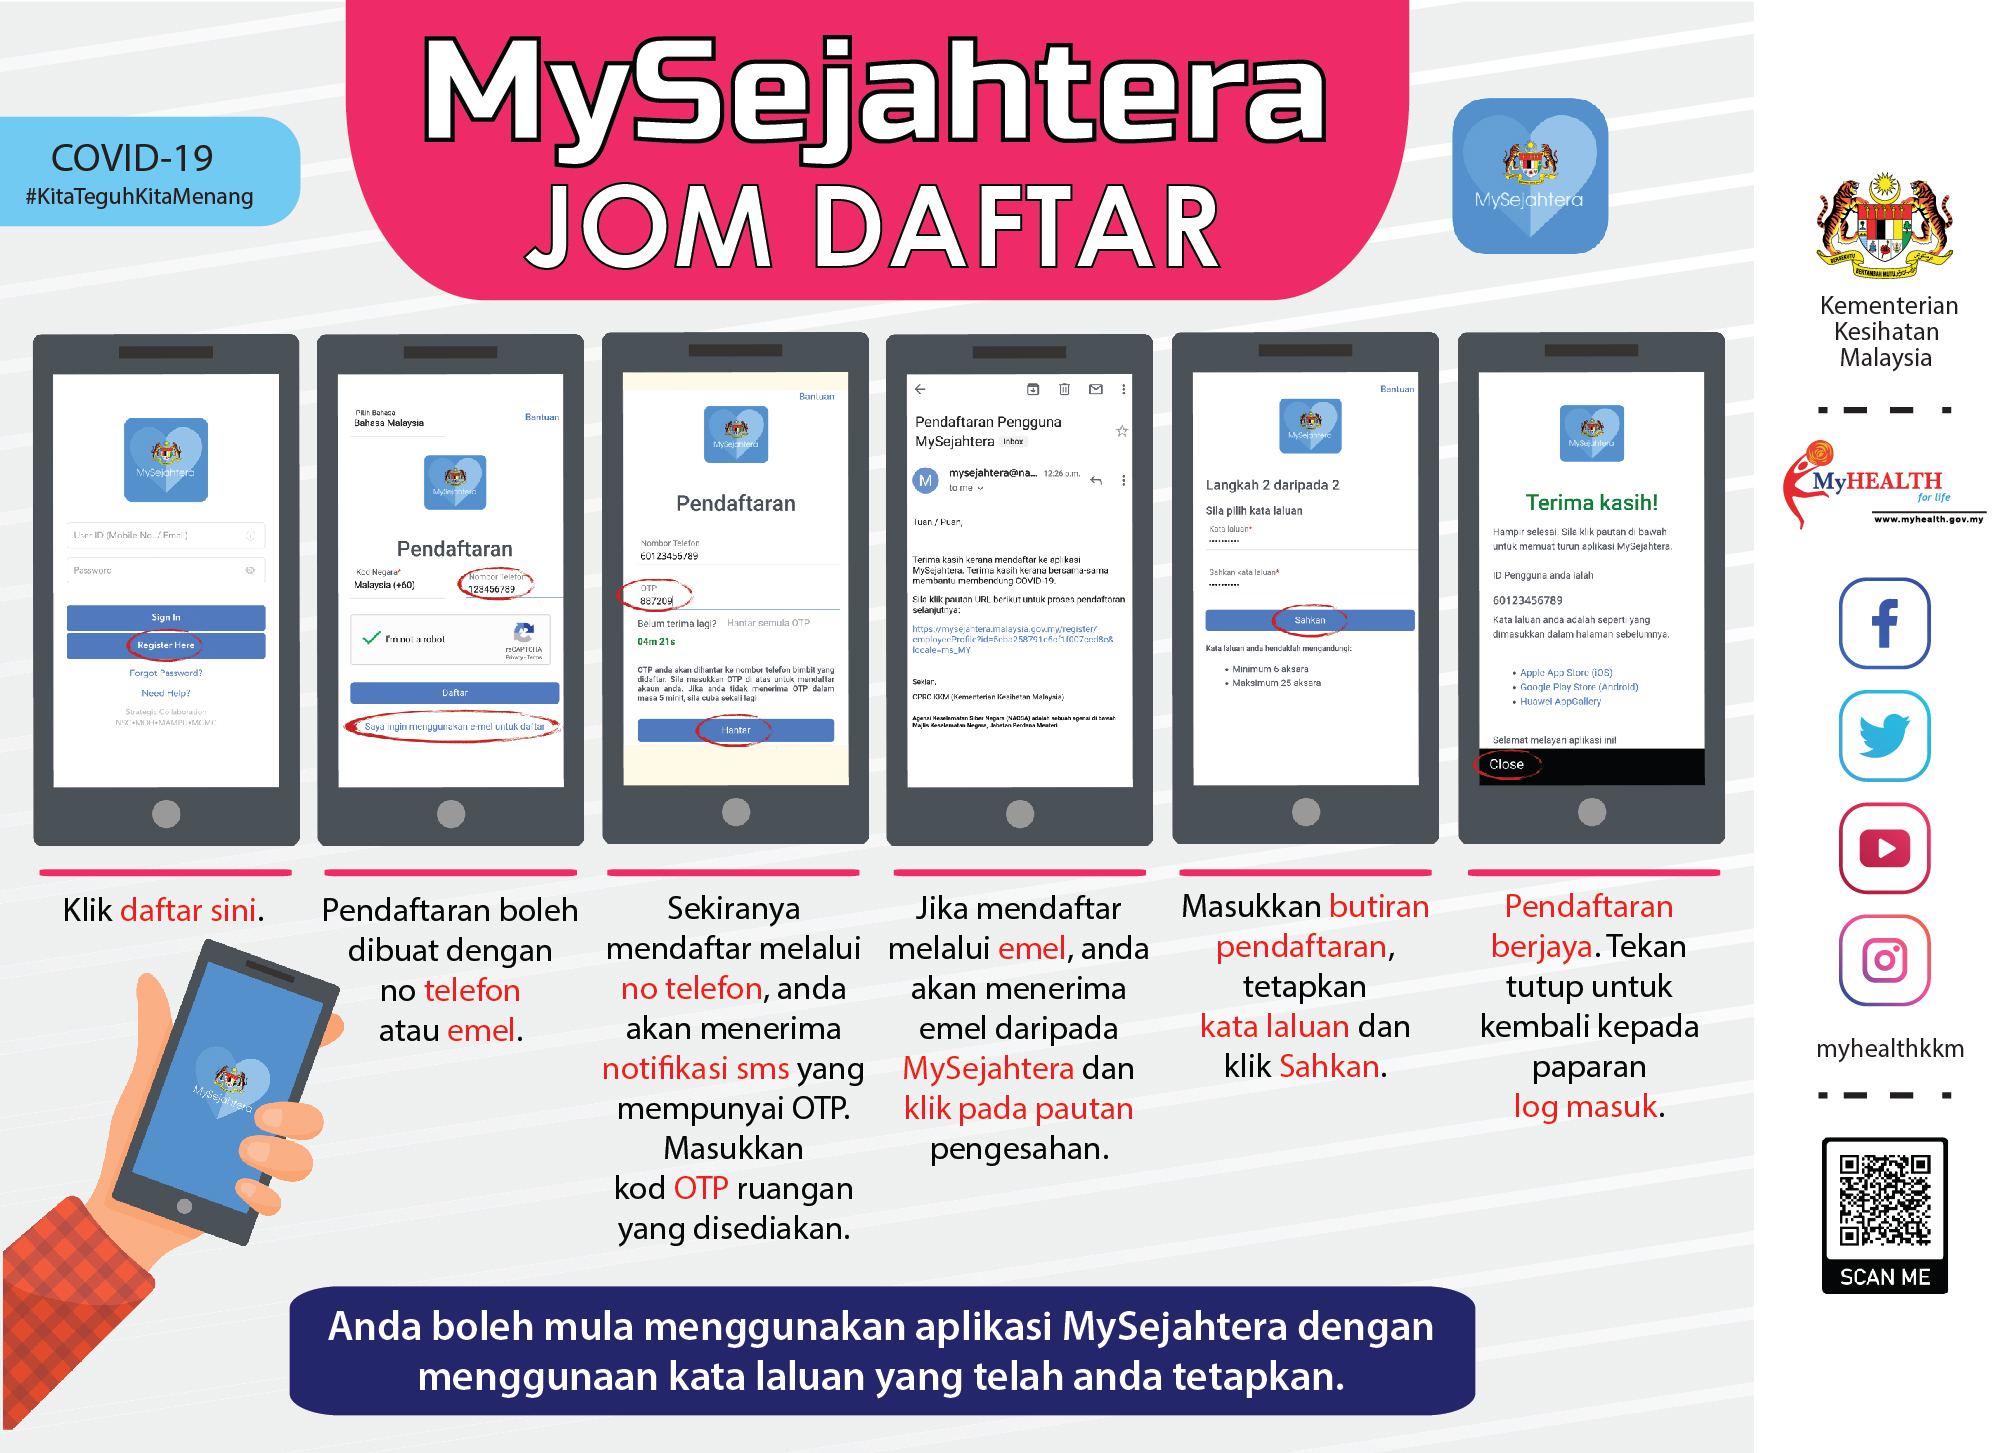 Mysejahtera colour code